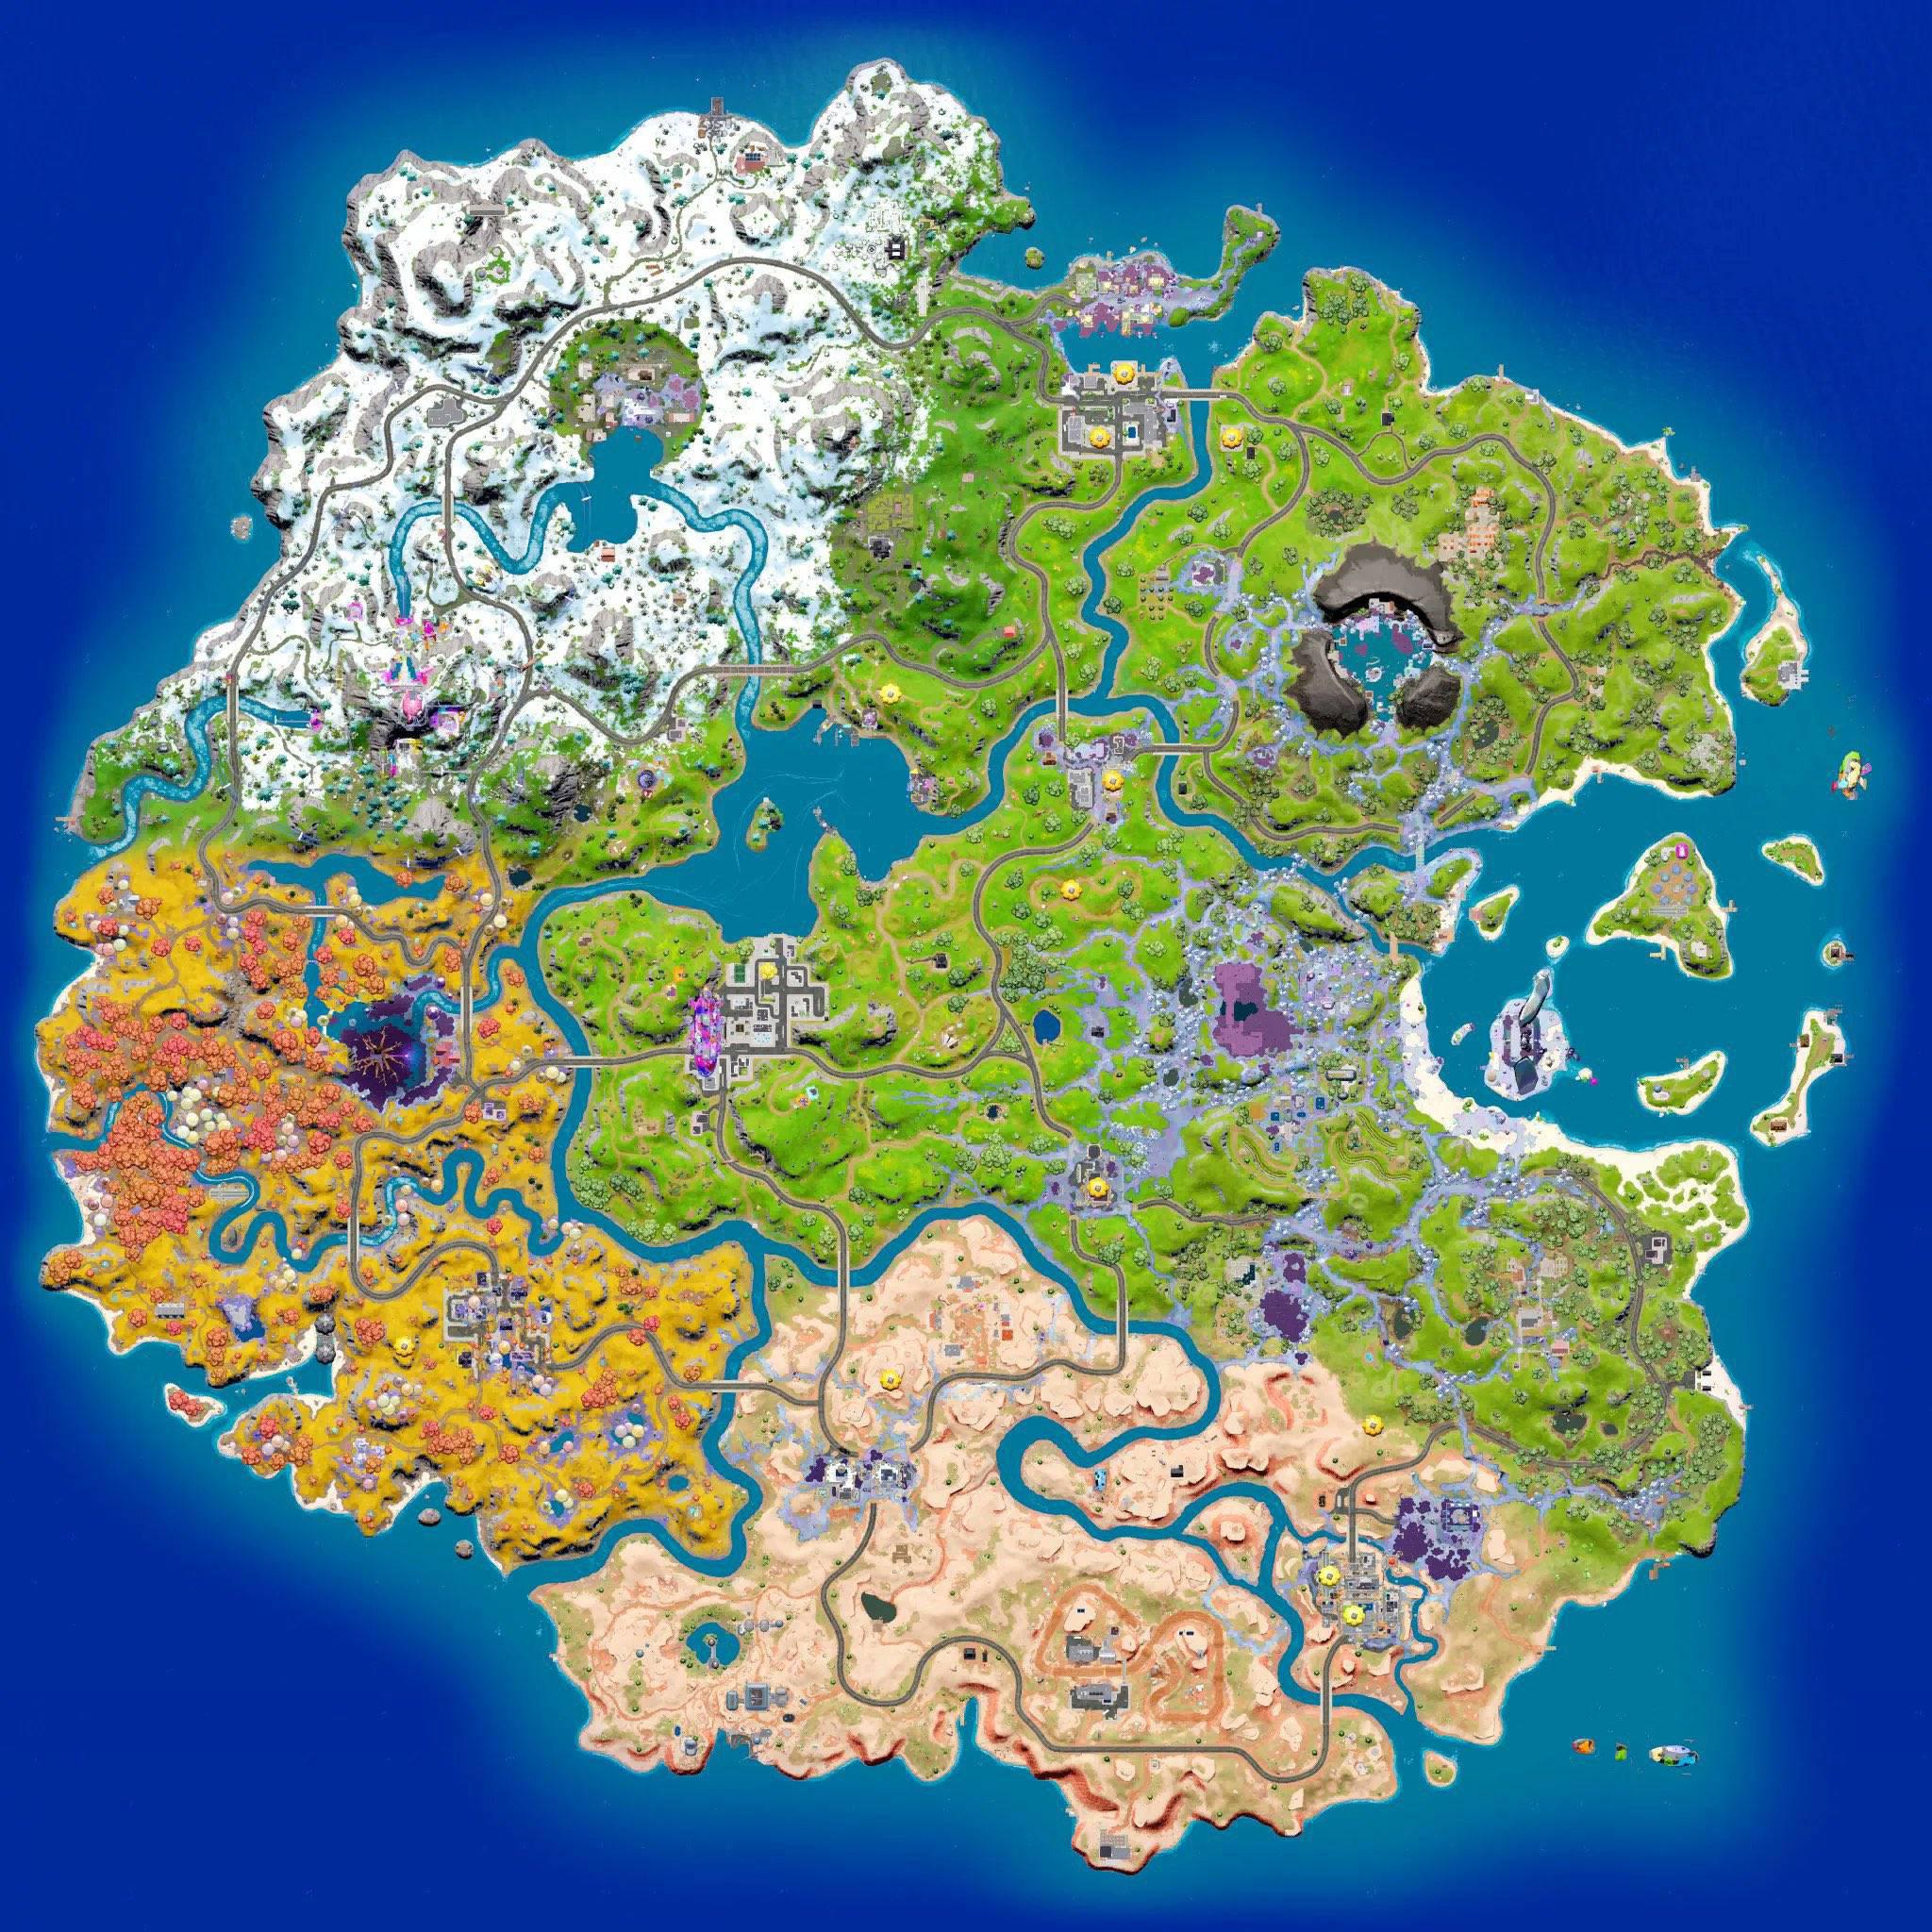 how to get battle royale island in creative